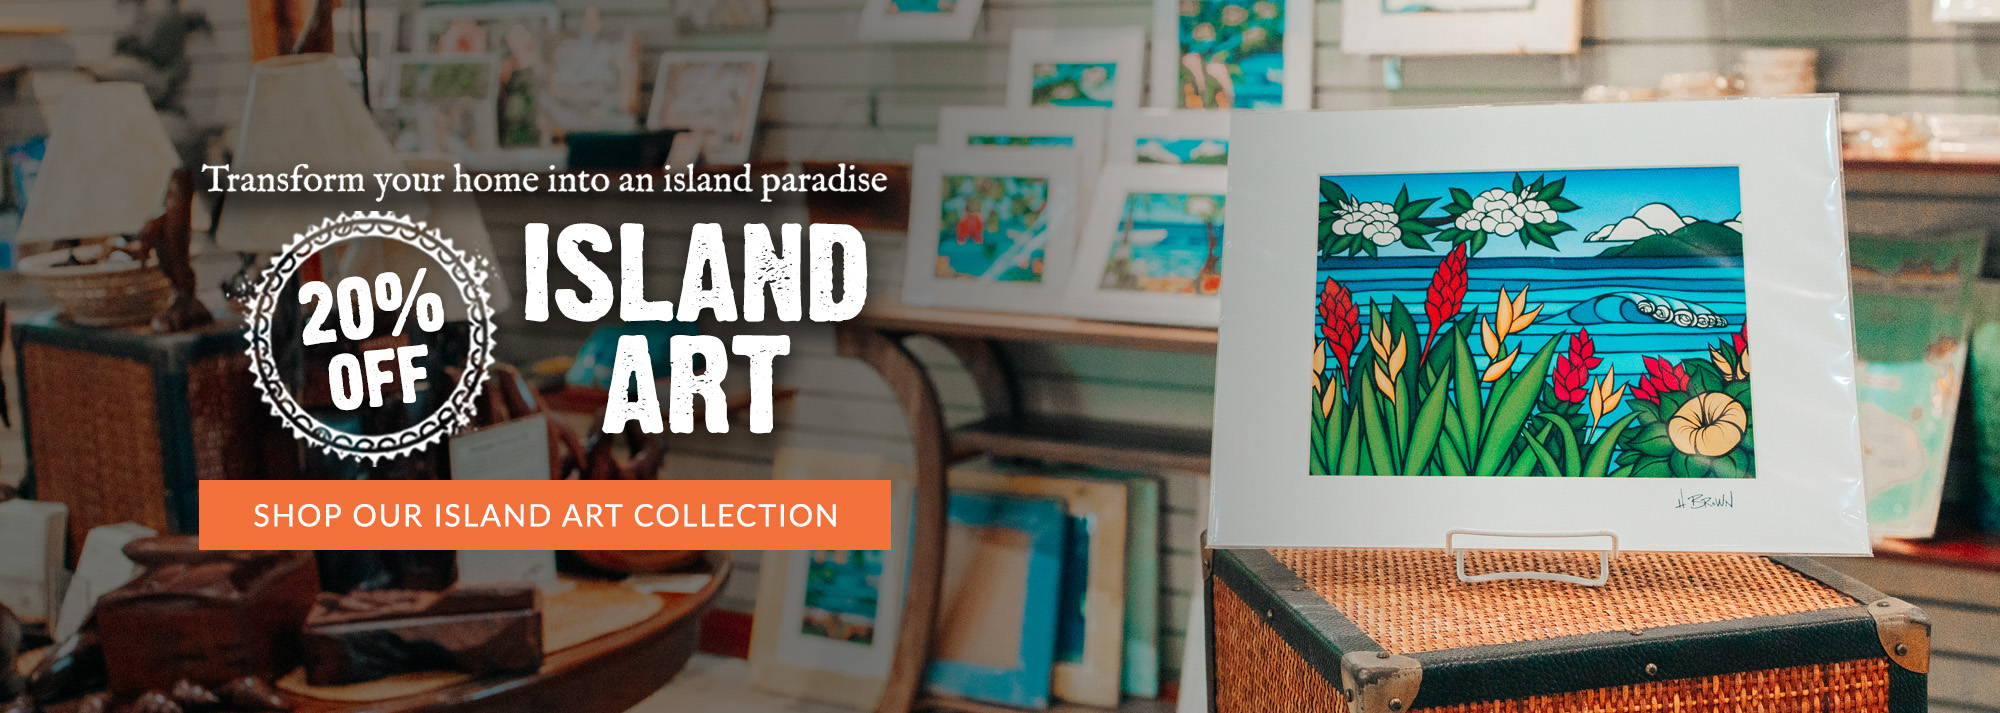 Transform your home into a tropical oasis with our exquisite Island Art Collection, now available at a discounted price of 20% off. Our collection features a wide range of stunning island artwork that will help you bring the beauty and tranquility of island life into your space.